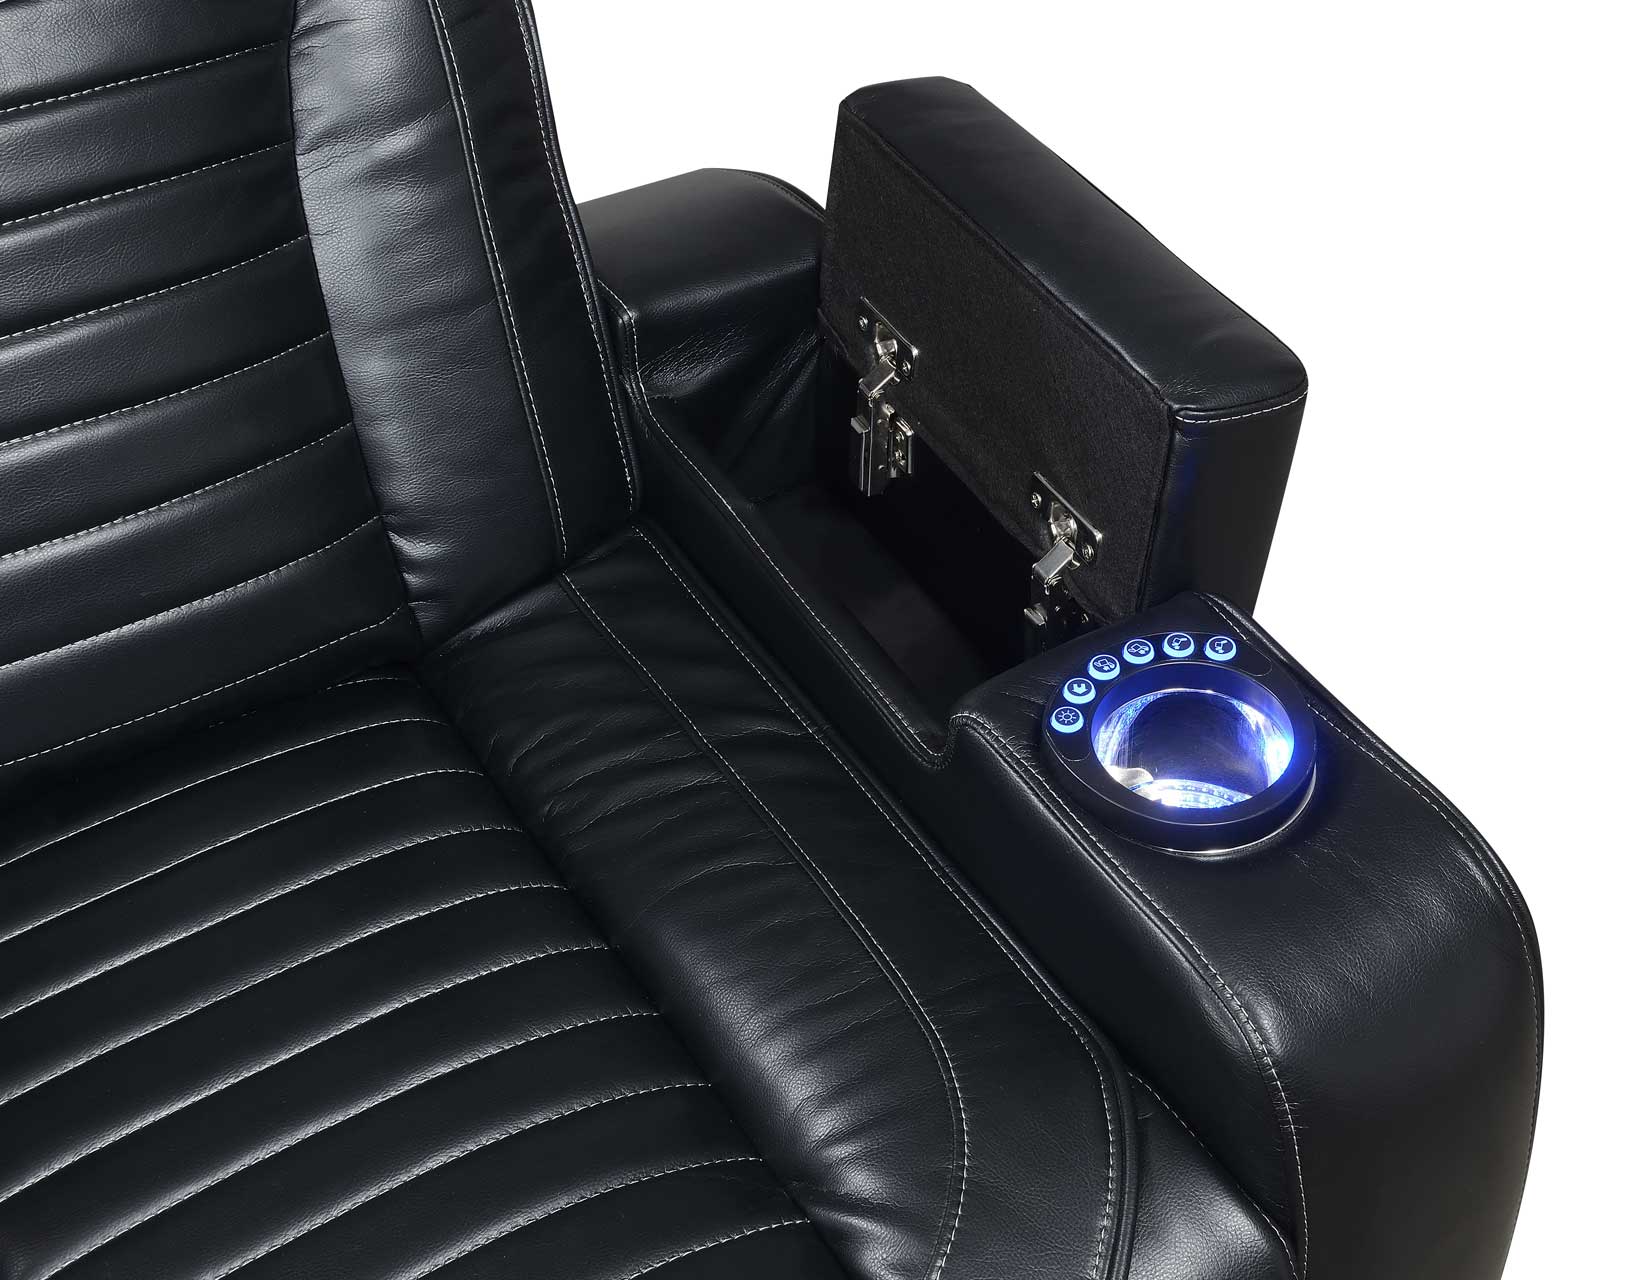 Lavon Dual-Power Leatherette Recliner by Steve Silver